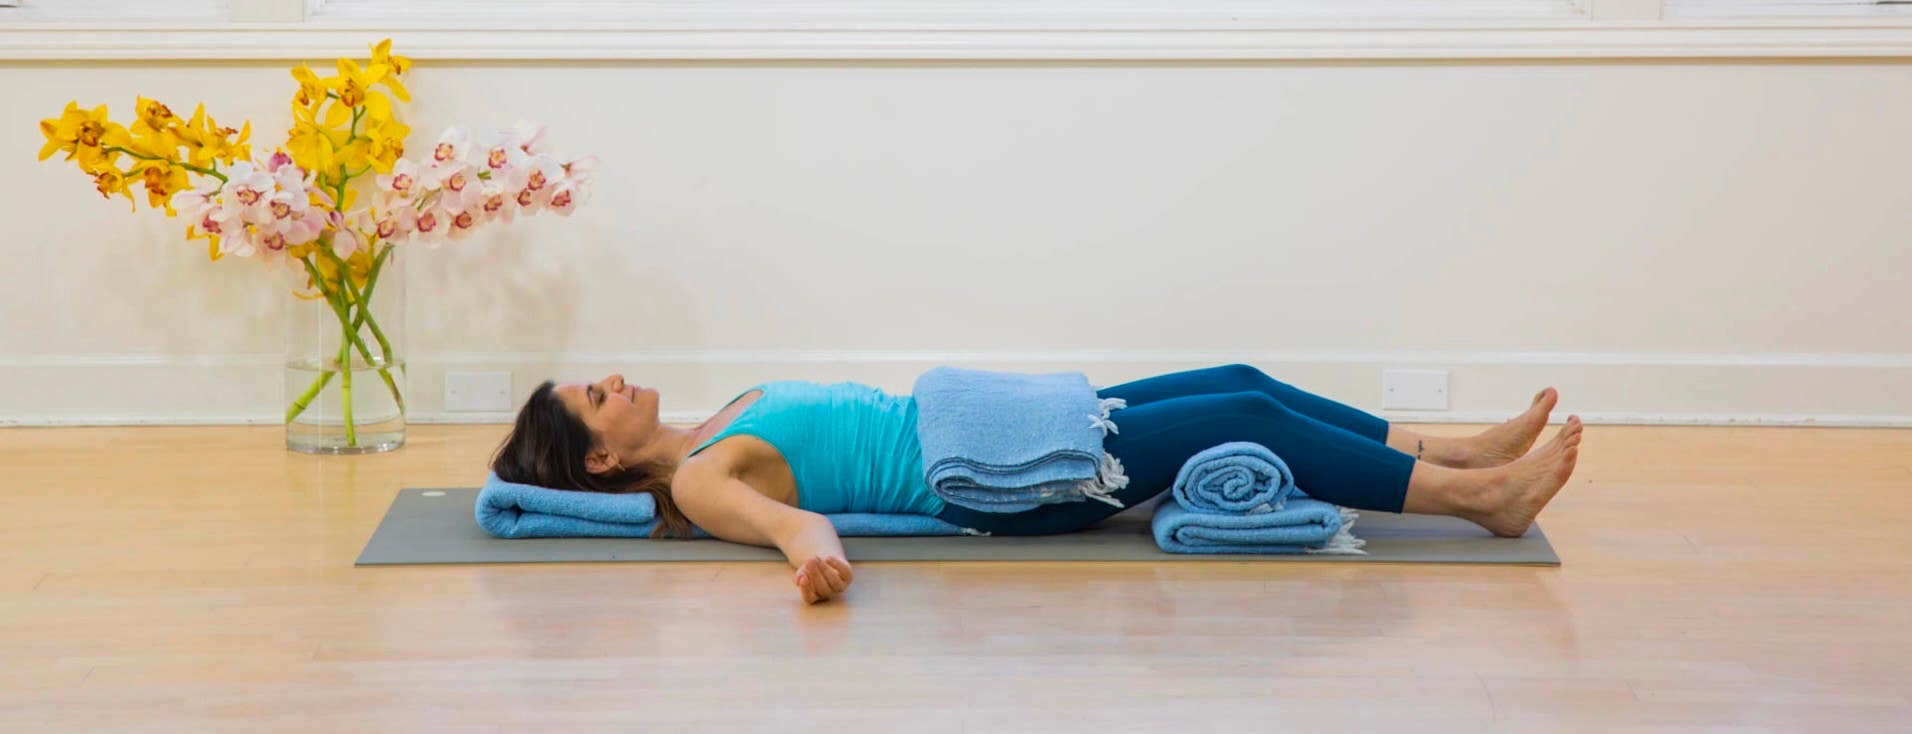 Restorative Yoga 101: How to Add Props to Child's Pose